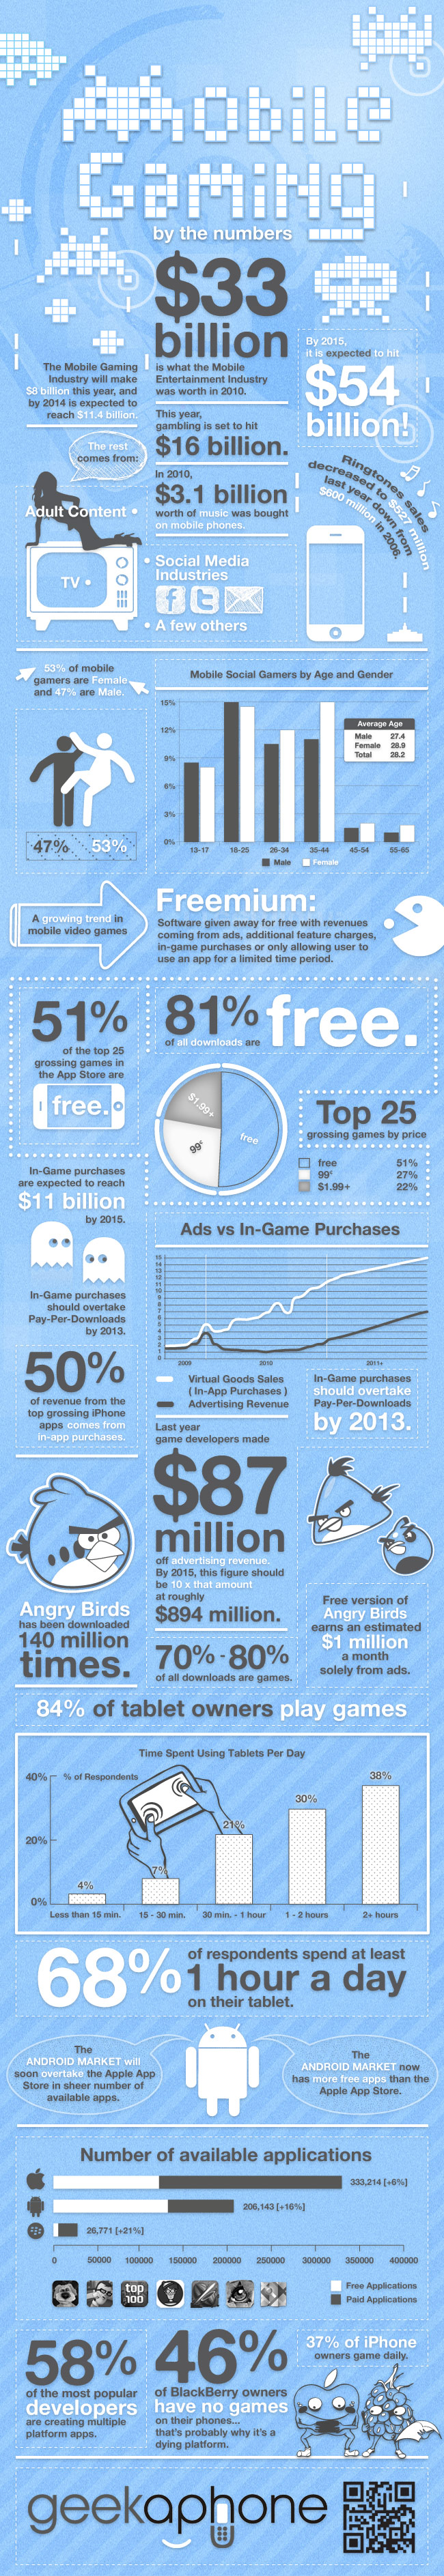 Infographic Mobile Gaming Statistics Mobile Gaming Industry Statistics for 2011 [Inforgraphic]